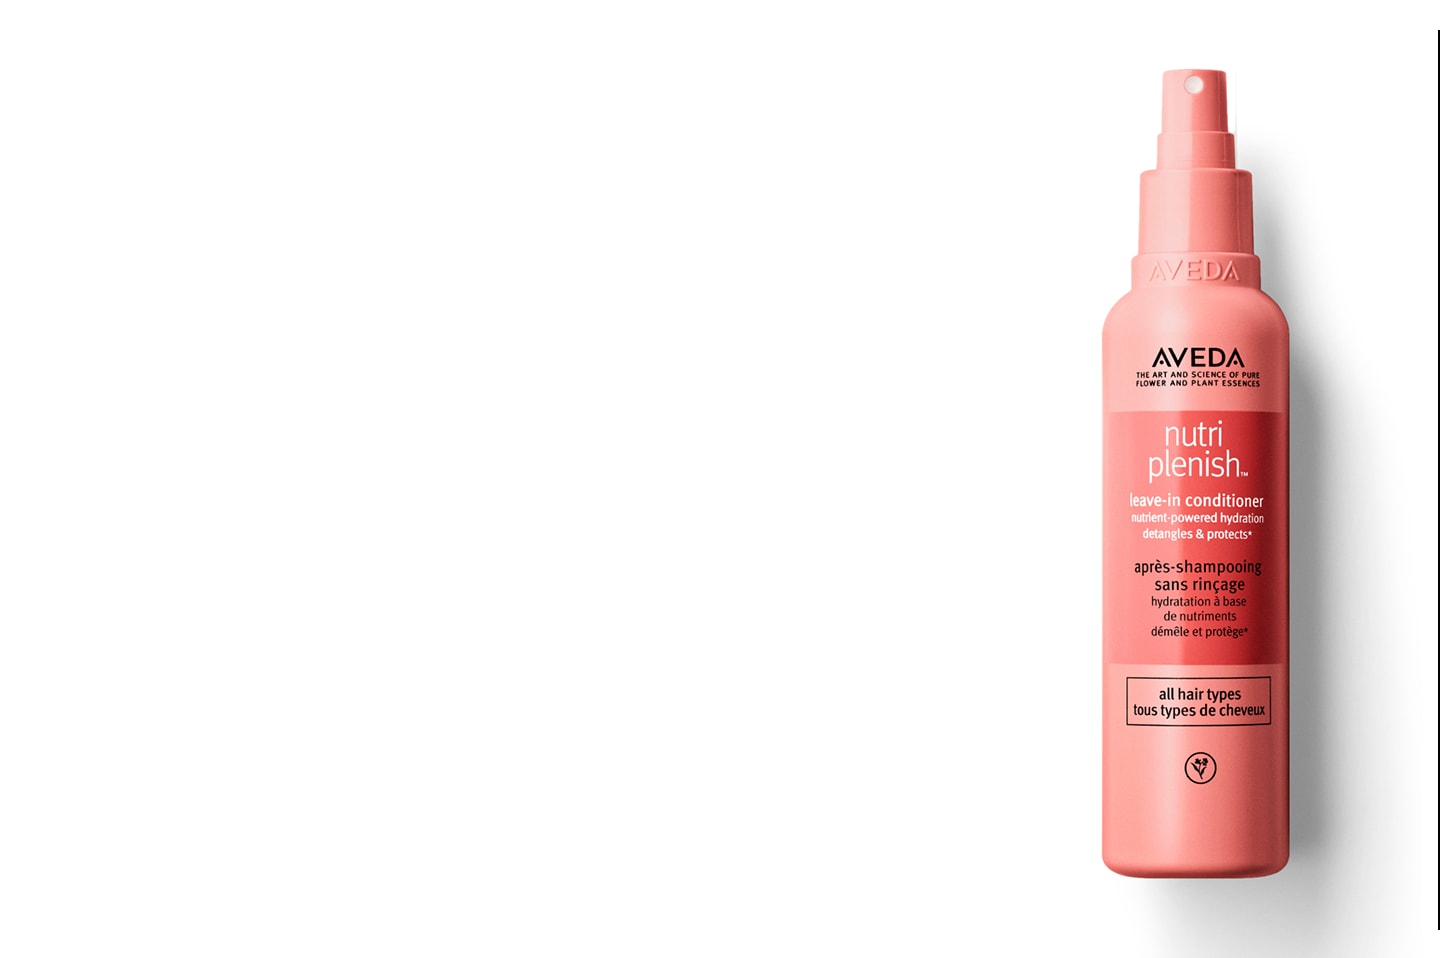 nutriplenish leave-in conditioner - 100% vegan hair nutrition for up to 2x the shine.